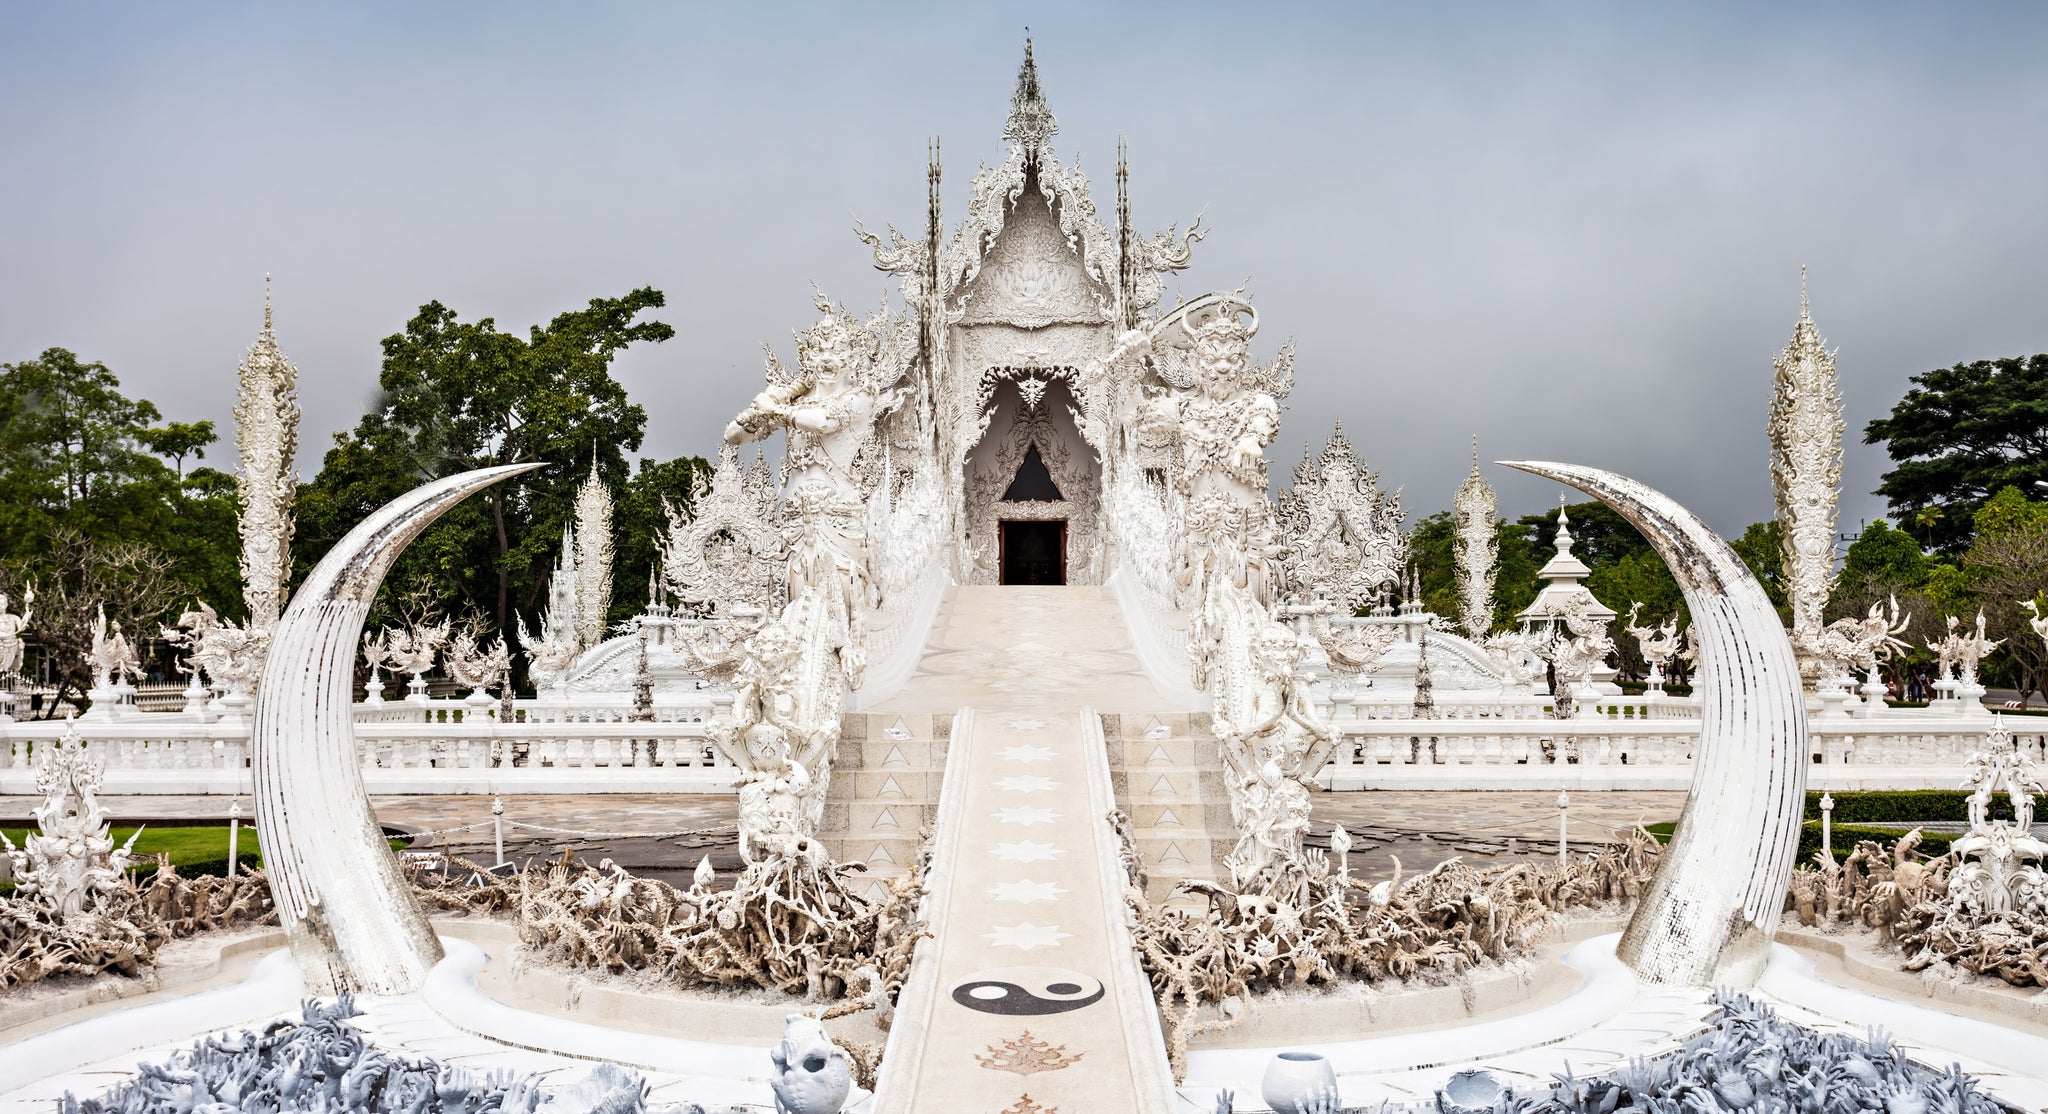 The Elephant Temple in Chiang Rai